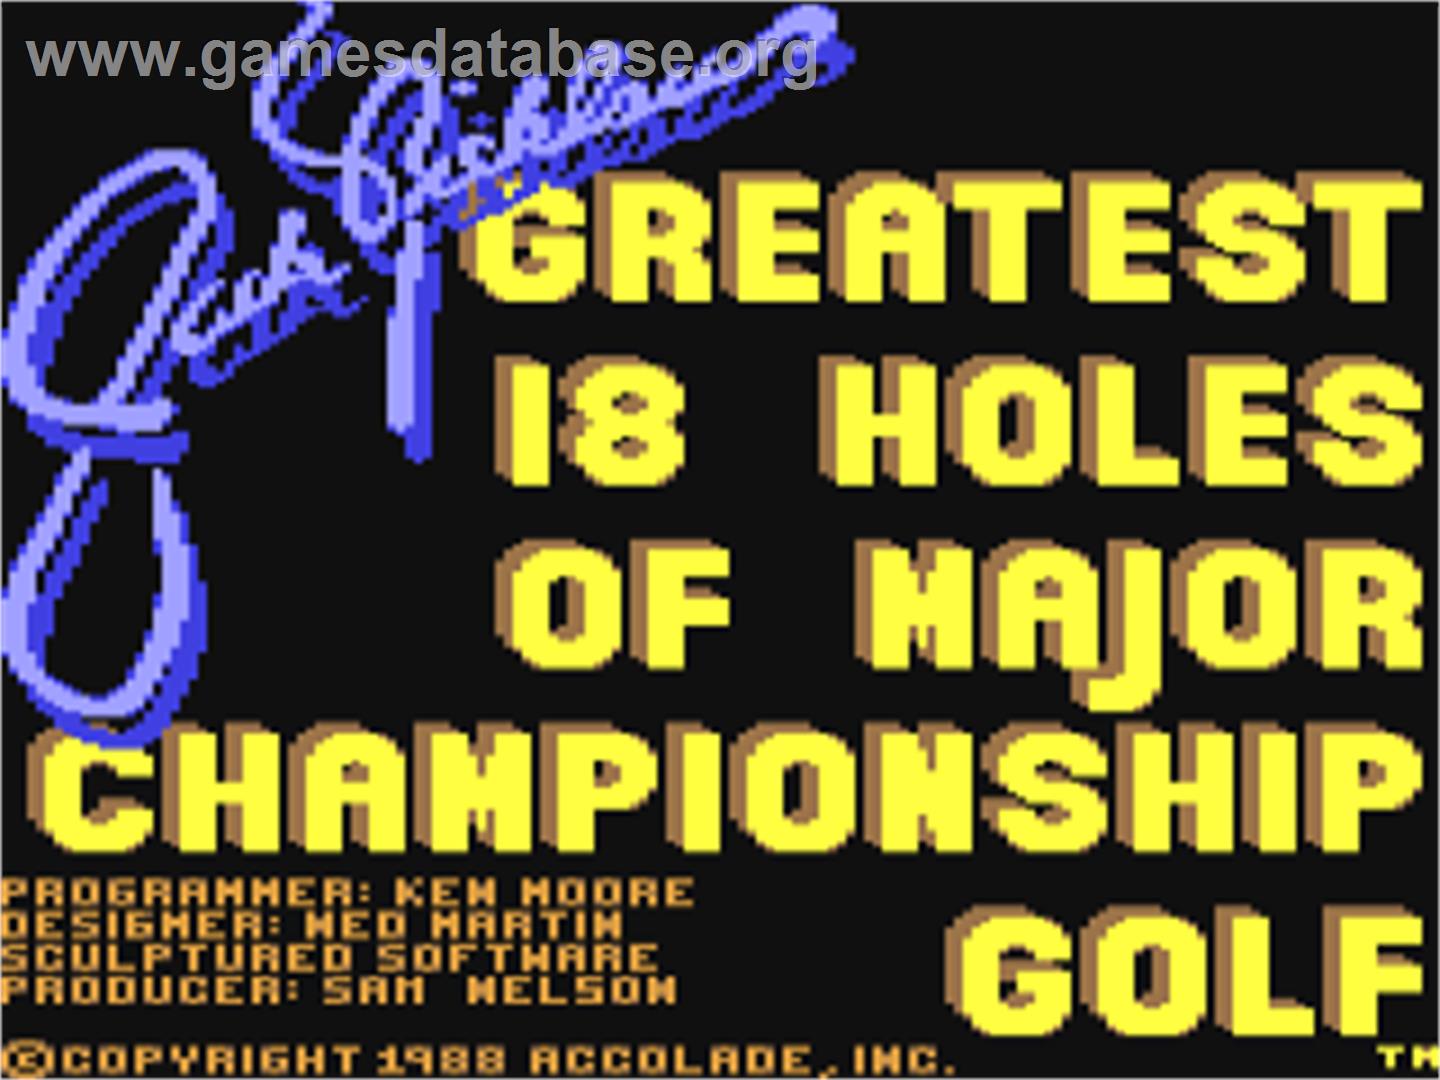 Jack Nicklaus' Greatest 18 Holes of Major Championship Golf - Commodore 64 - Artwork - Title Screen